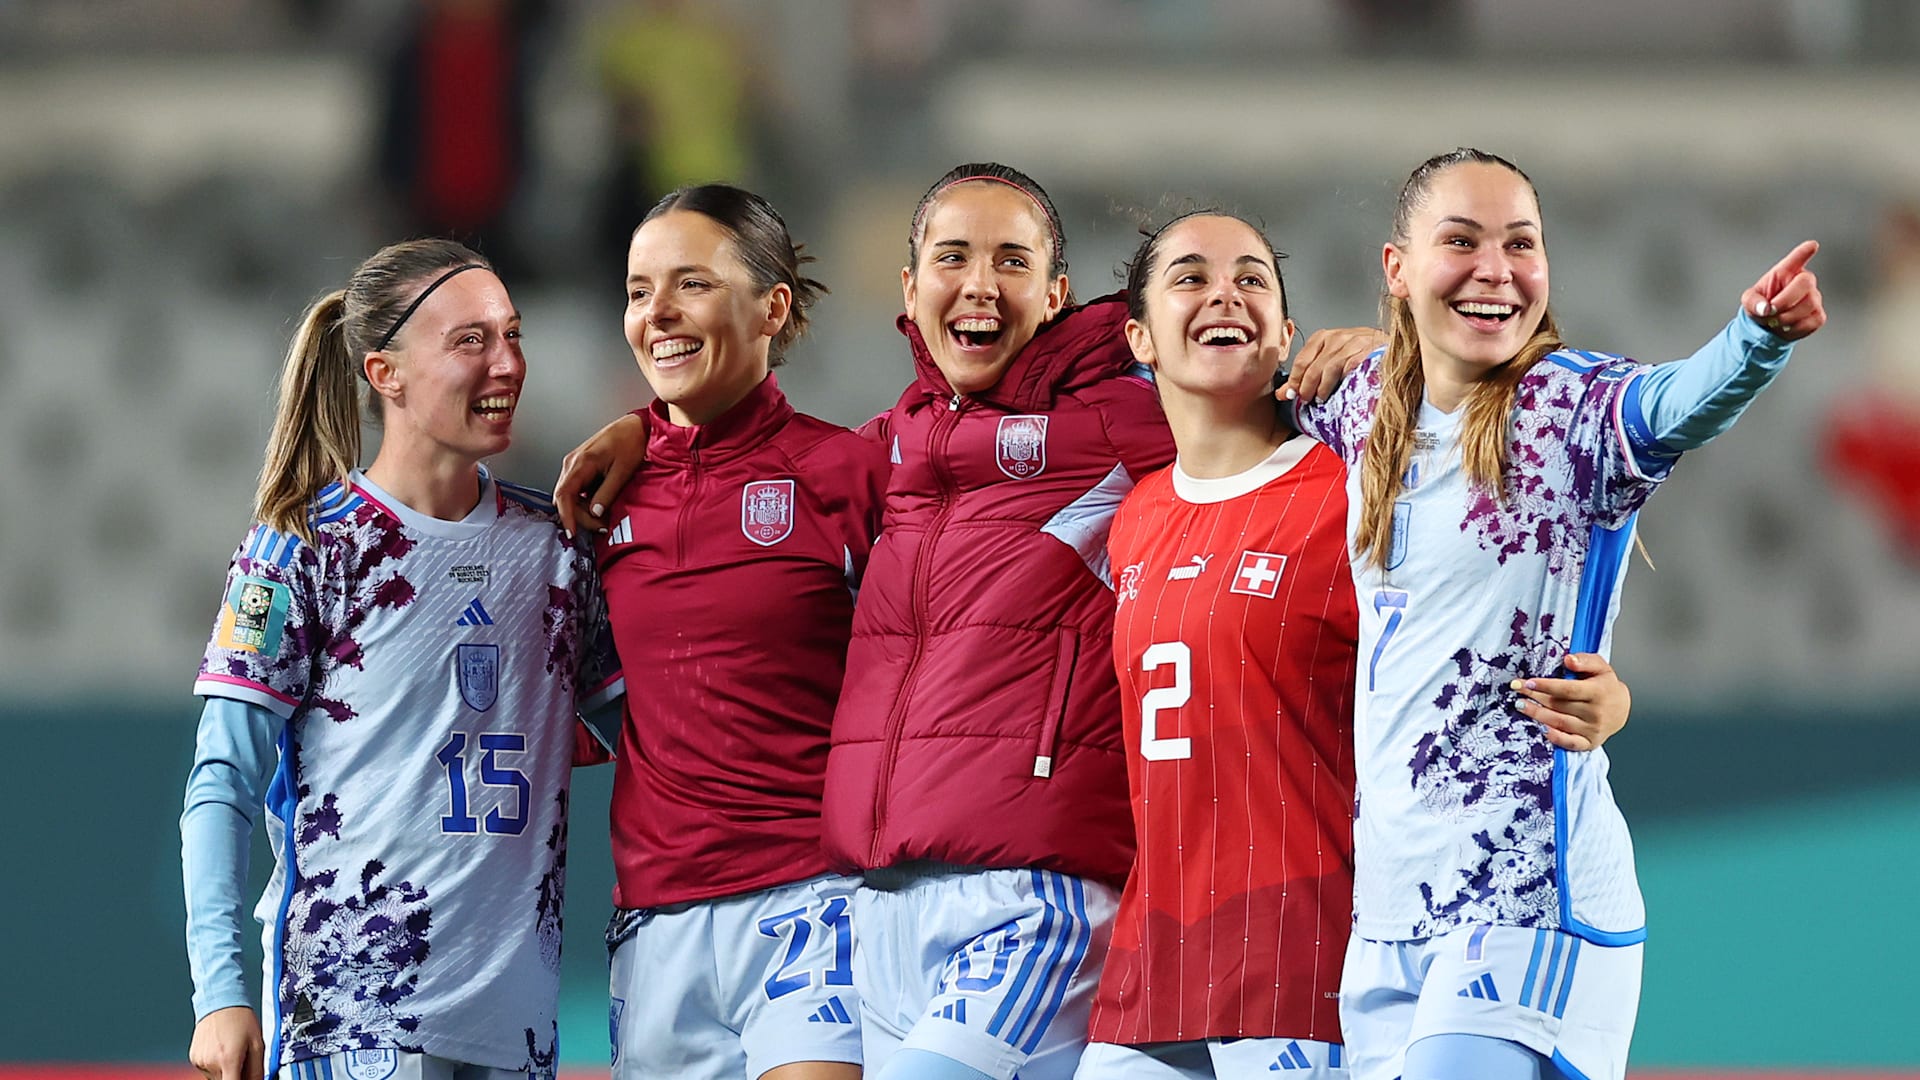 Women's World Cup 2019: What we learned from the historic tournament